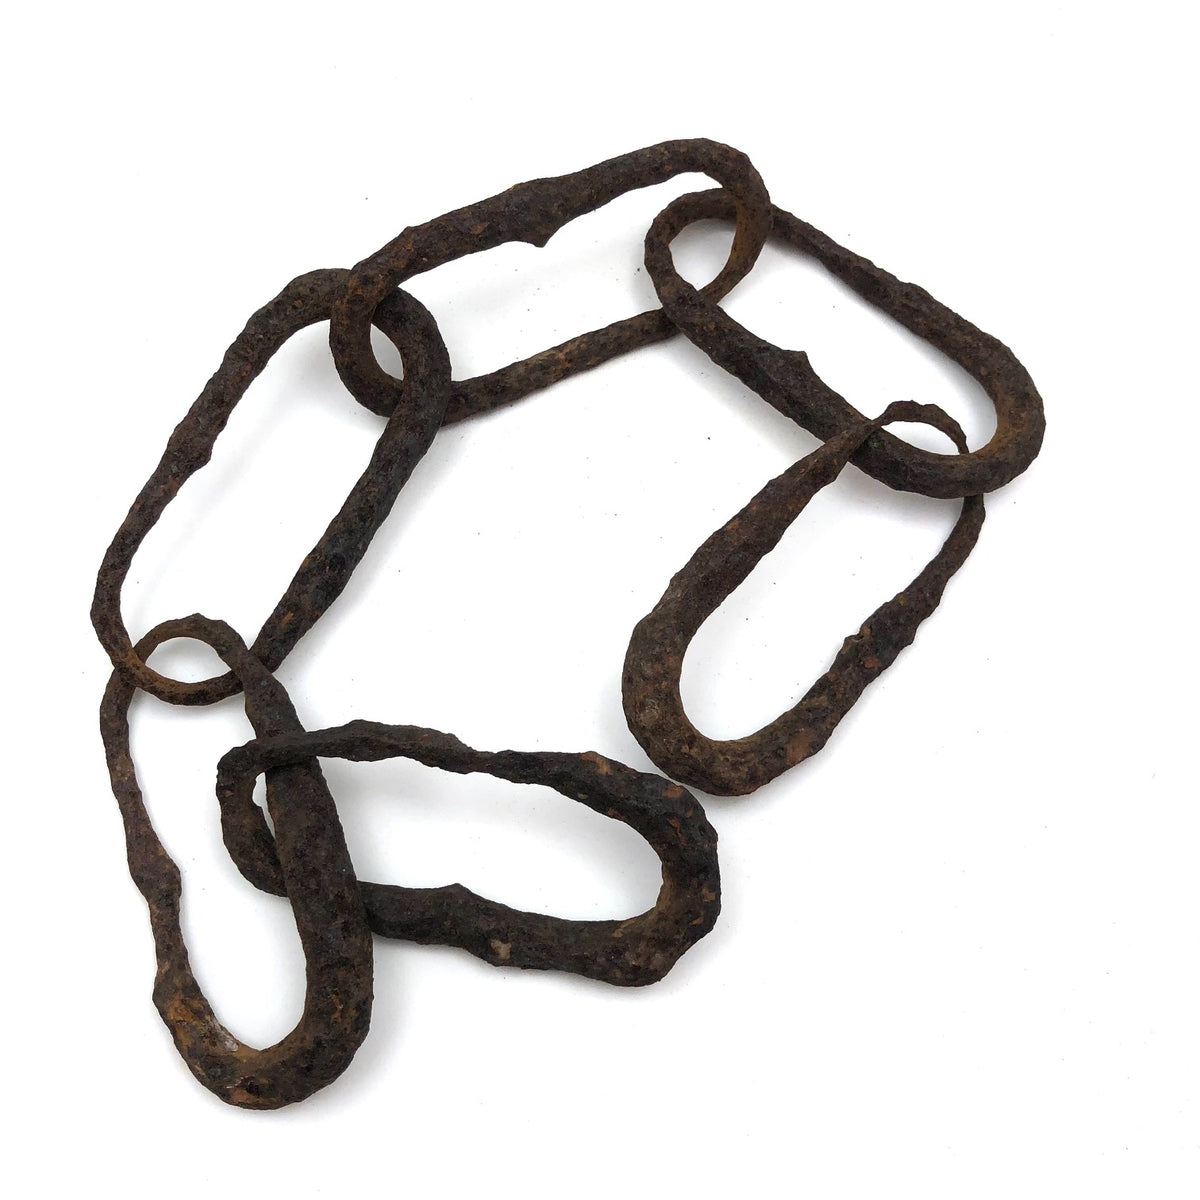 Beautifully Eroded Old Hand-forged Iron Chain – critical EYE Finds